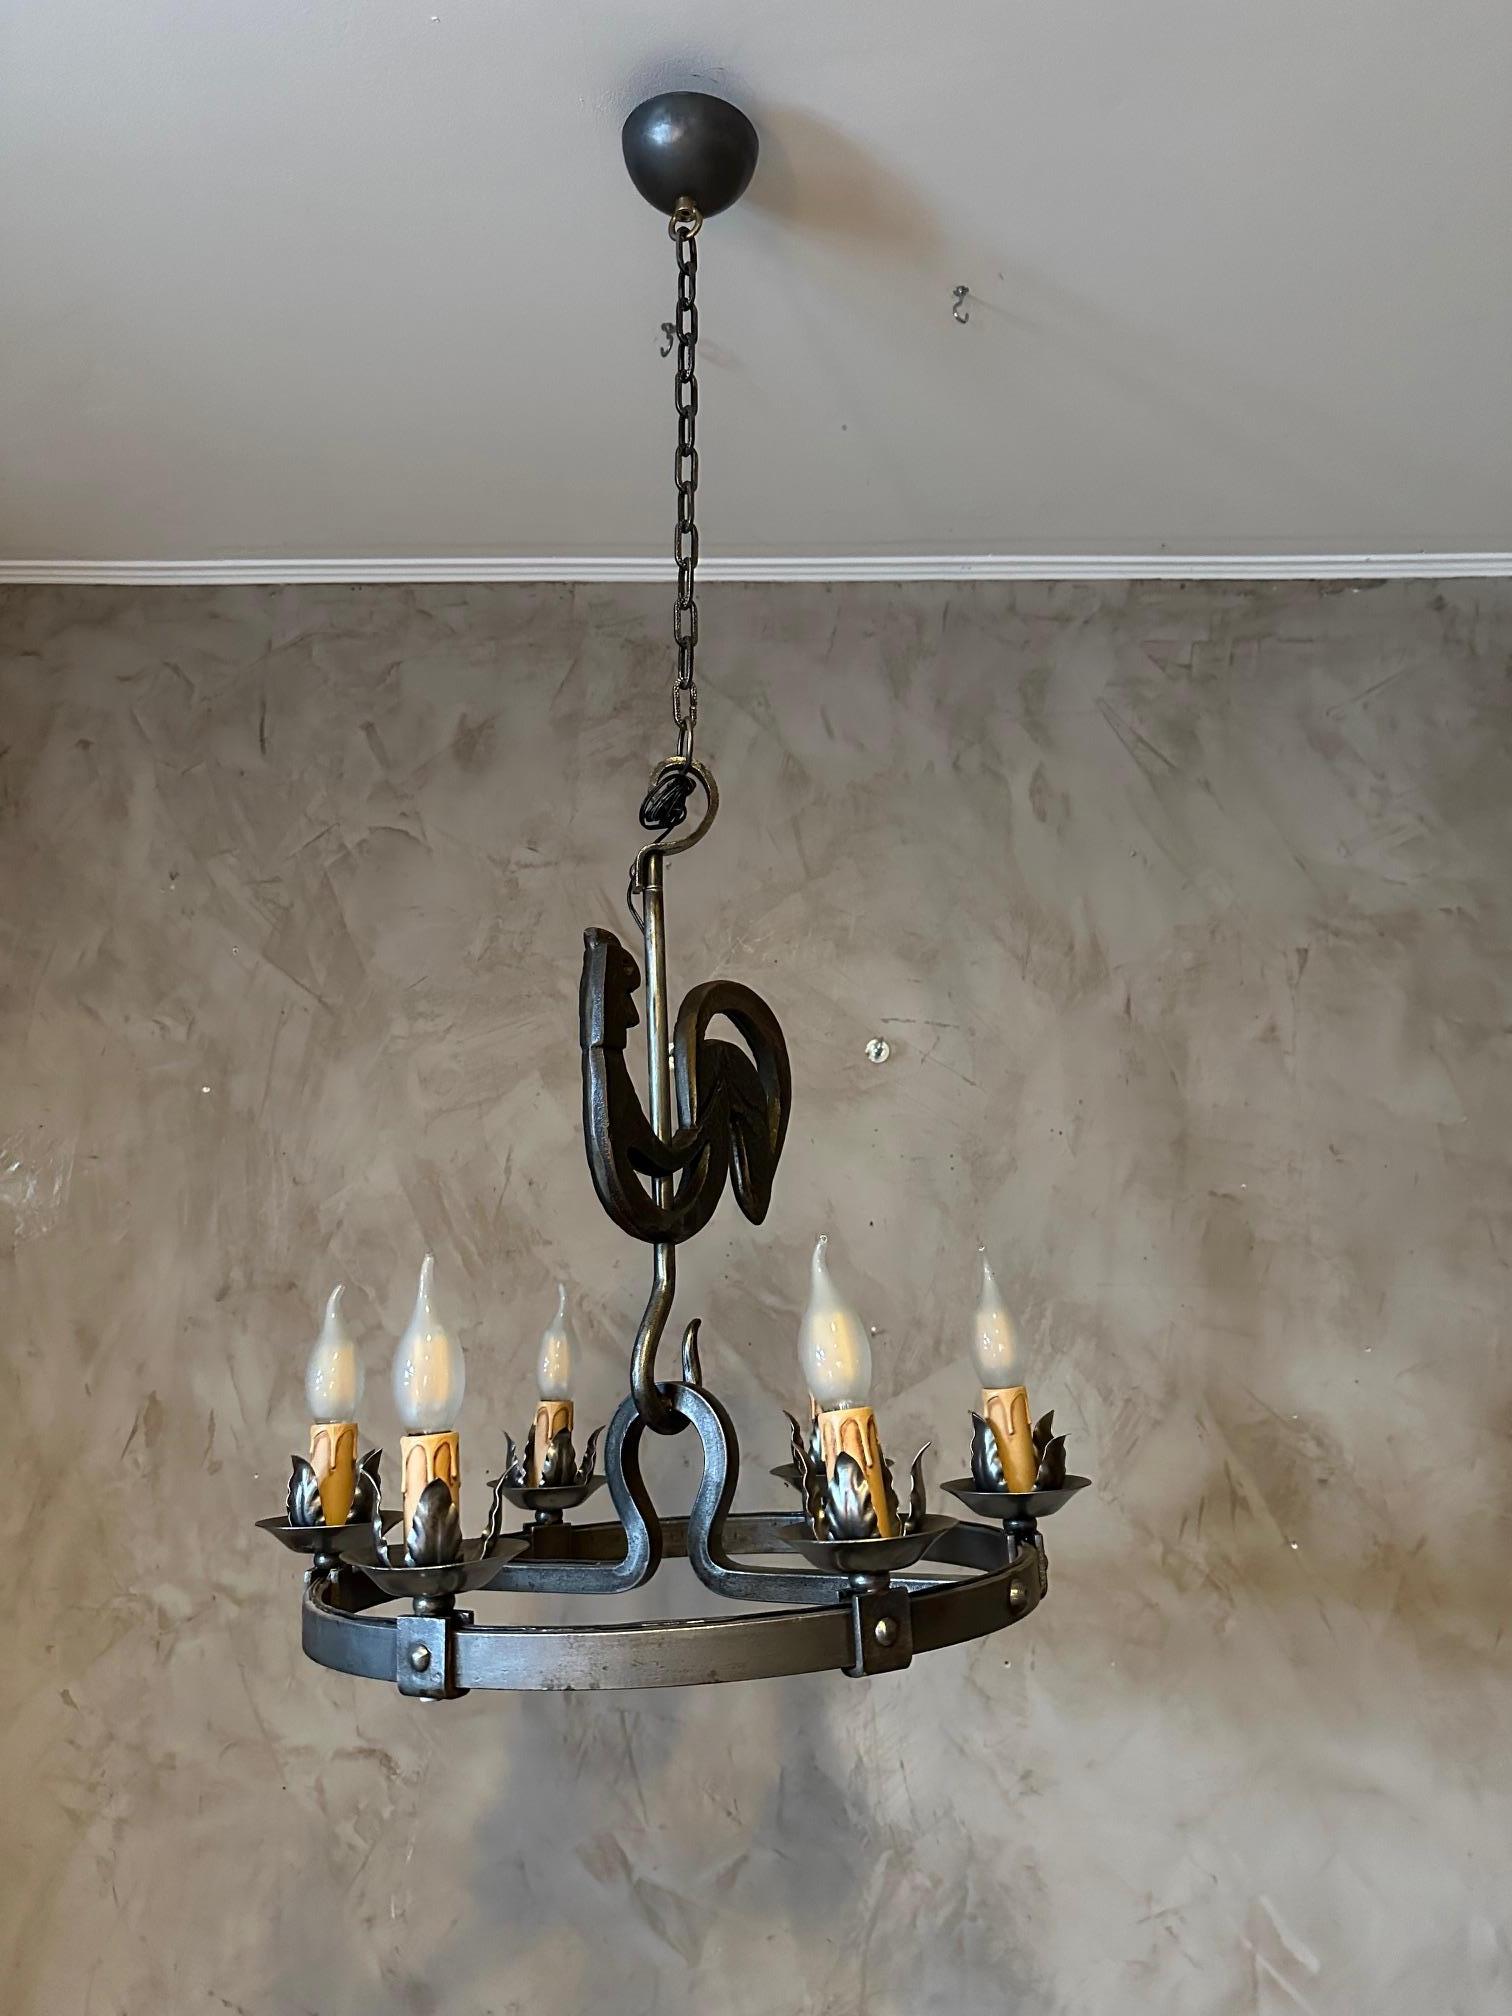 Wrought iron chandelier dating from the 1950s made by Jean Touret for the Marolles workshops in France. 
Rooster represented on the top of the chandelier, very beautiful iron work.
Six bulbs, fully electricity.

History of Jean Touret:
A young